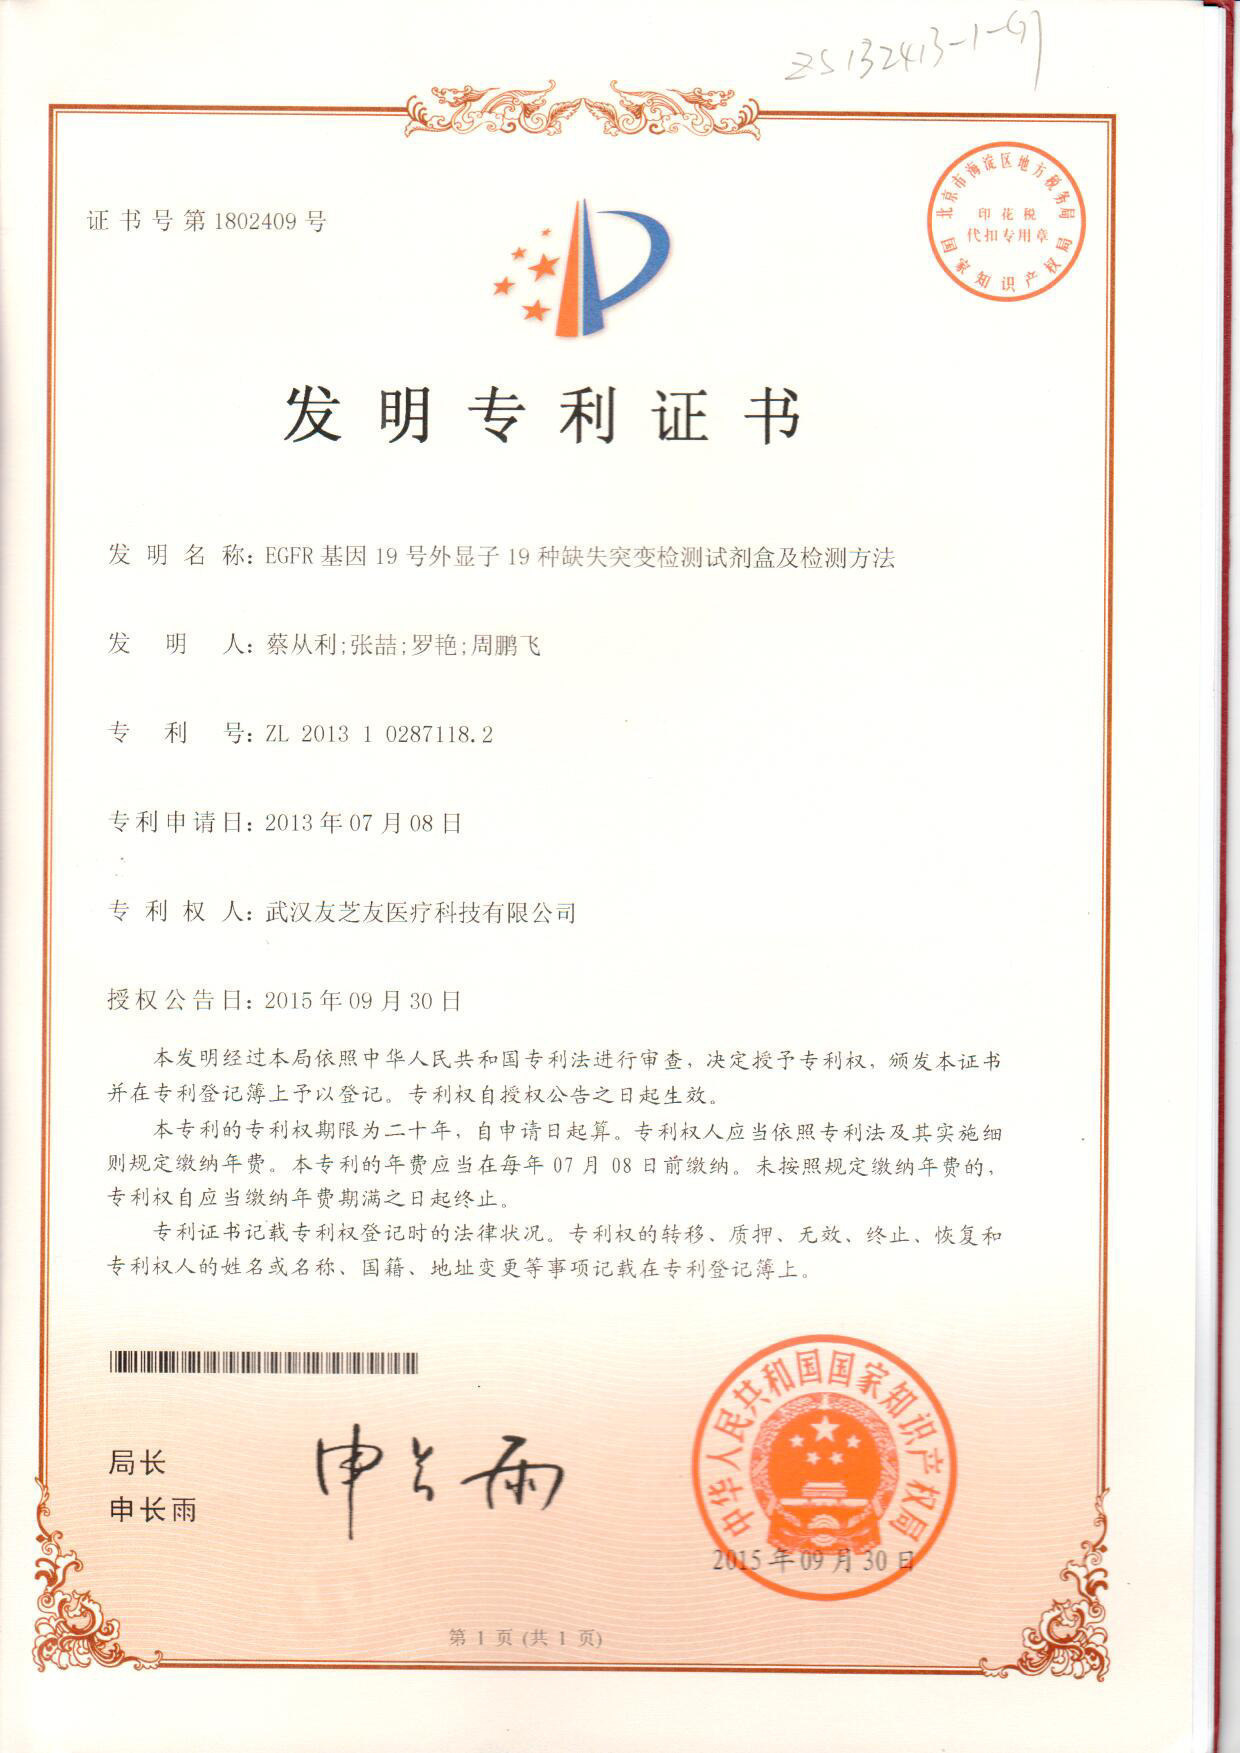 Patent Certificate for EGFR Invention